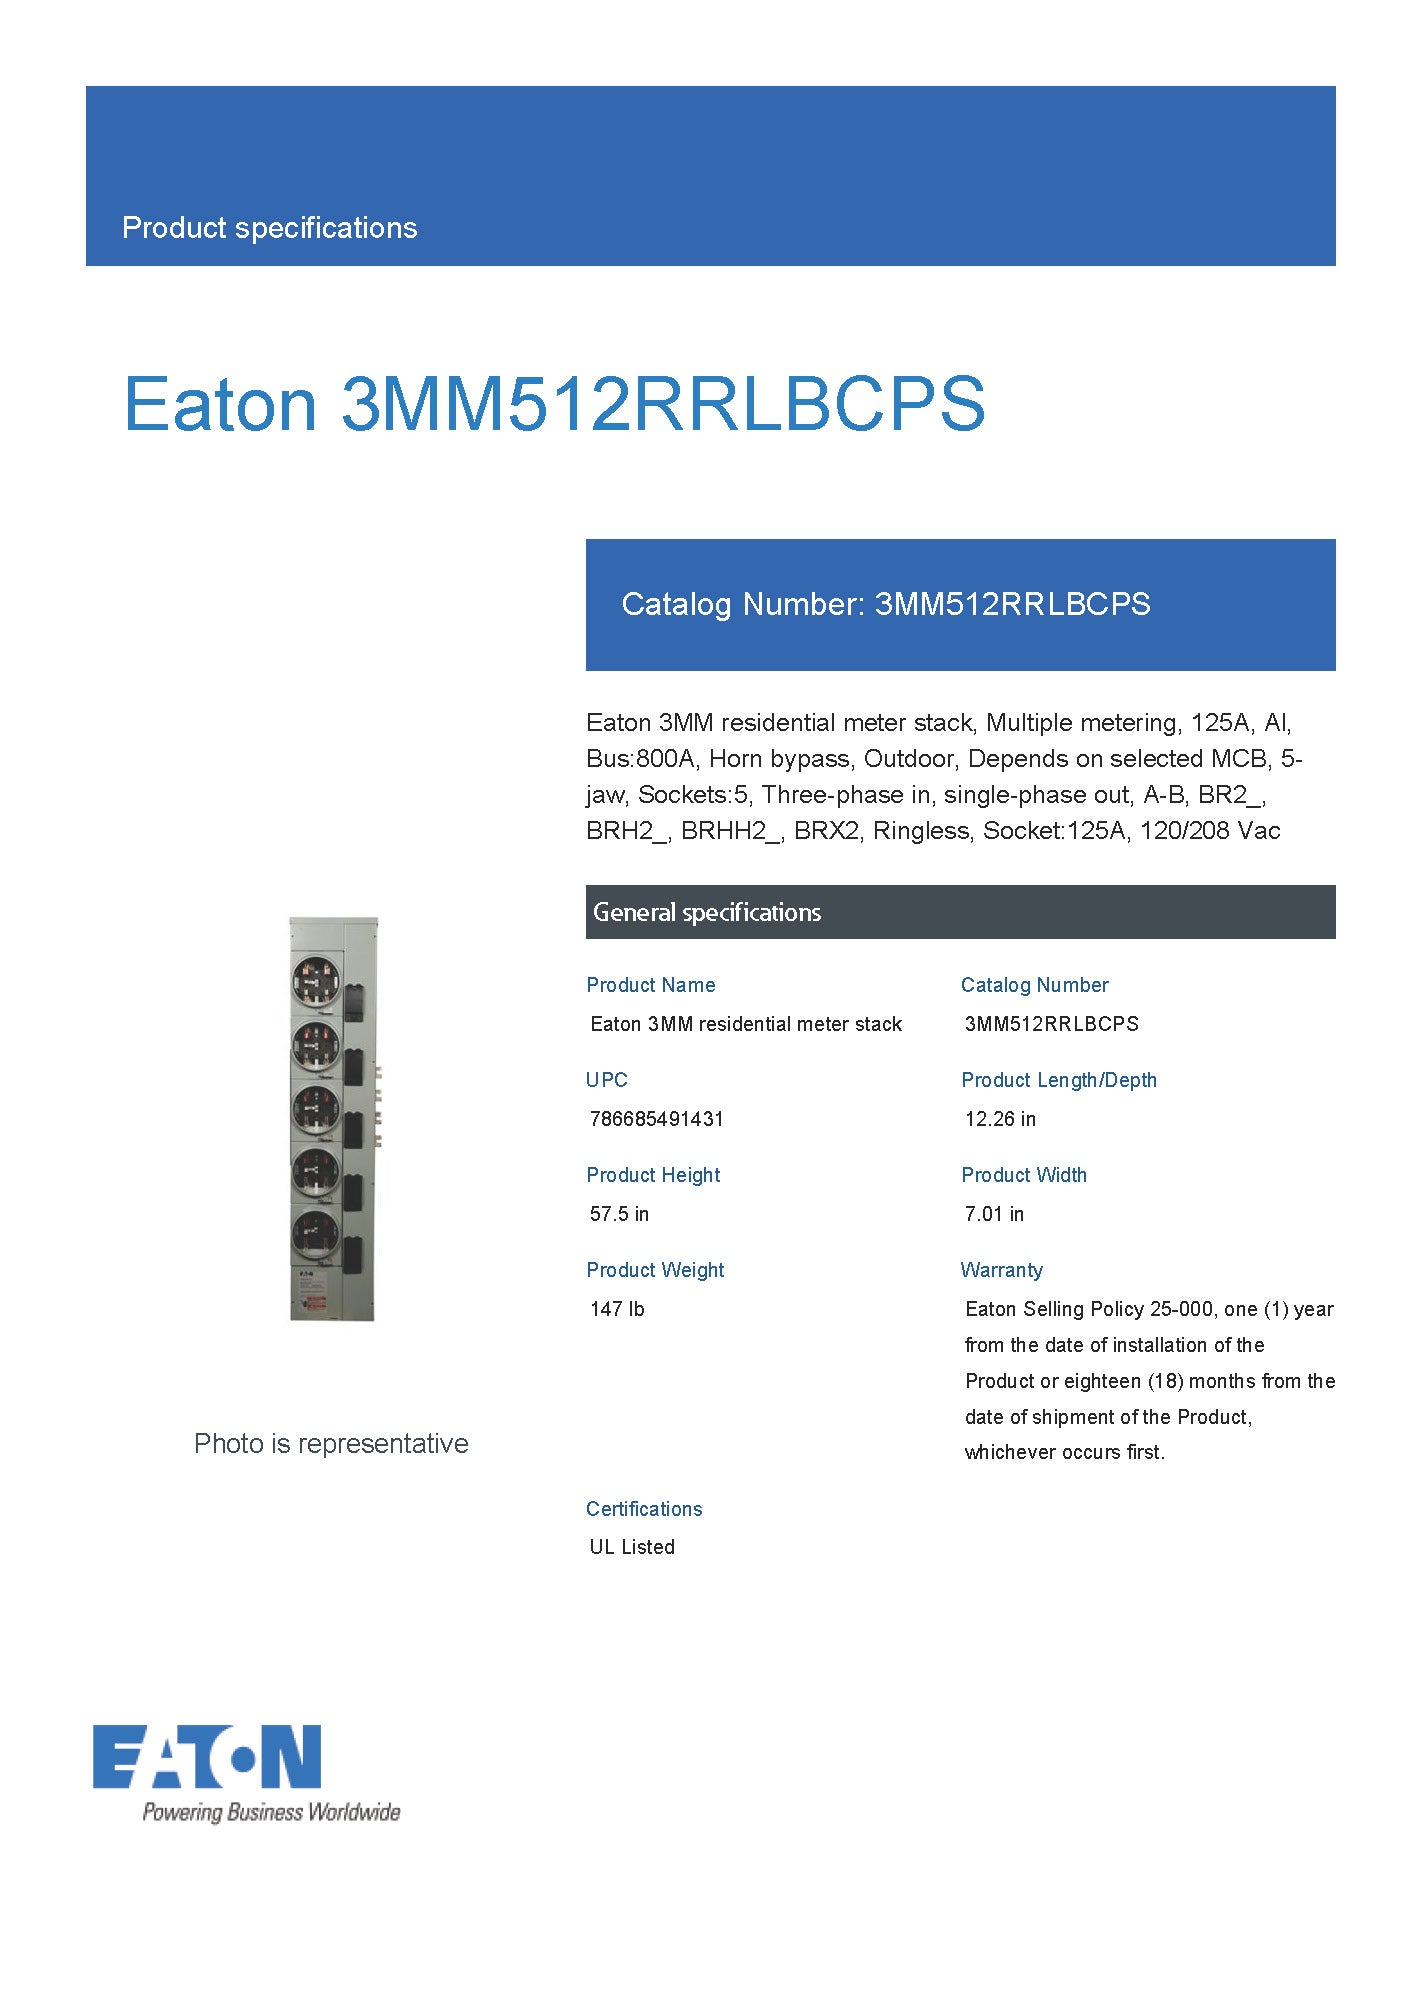 Eaton 3MM512RRLBCPS (3MM512RRLB) 3PH 5-Gang 125A Socket Ringless Horn Bypass CPS Approved Meter Stack